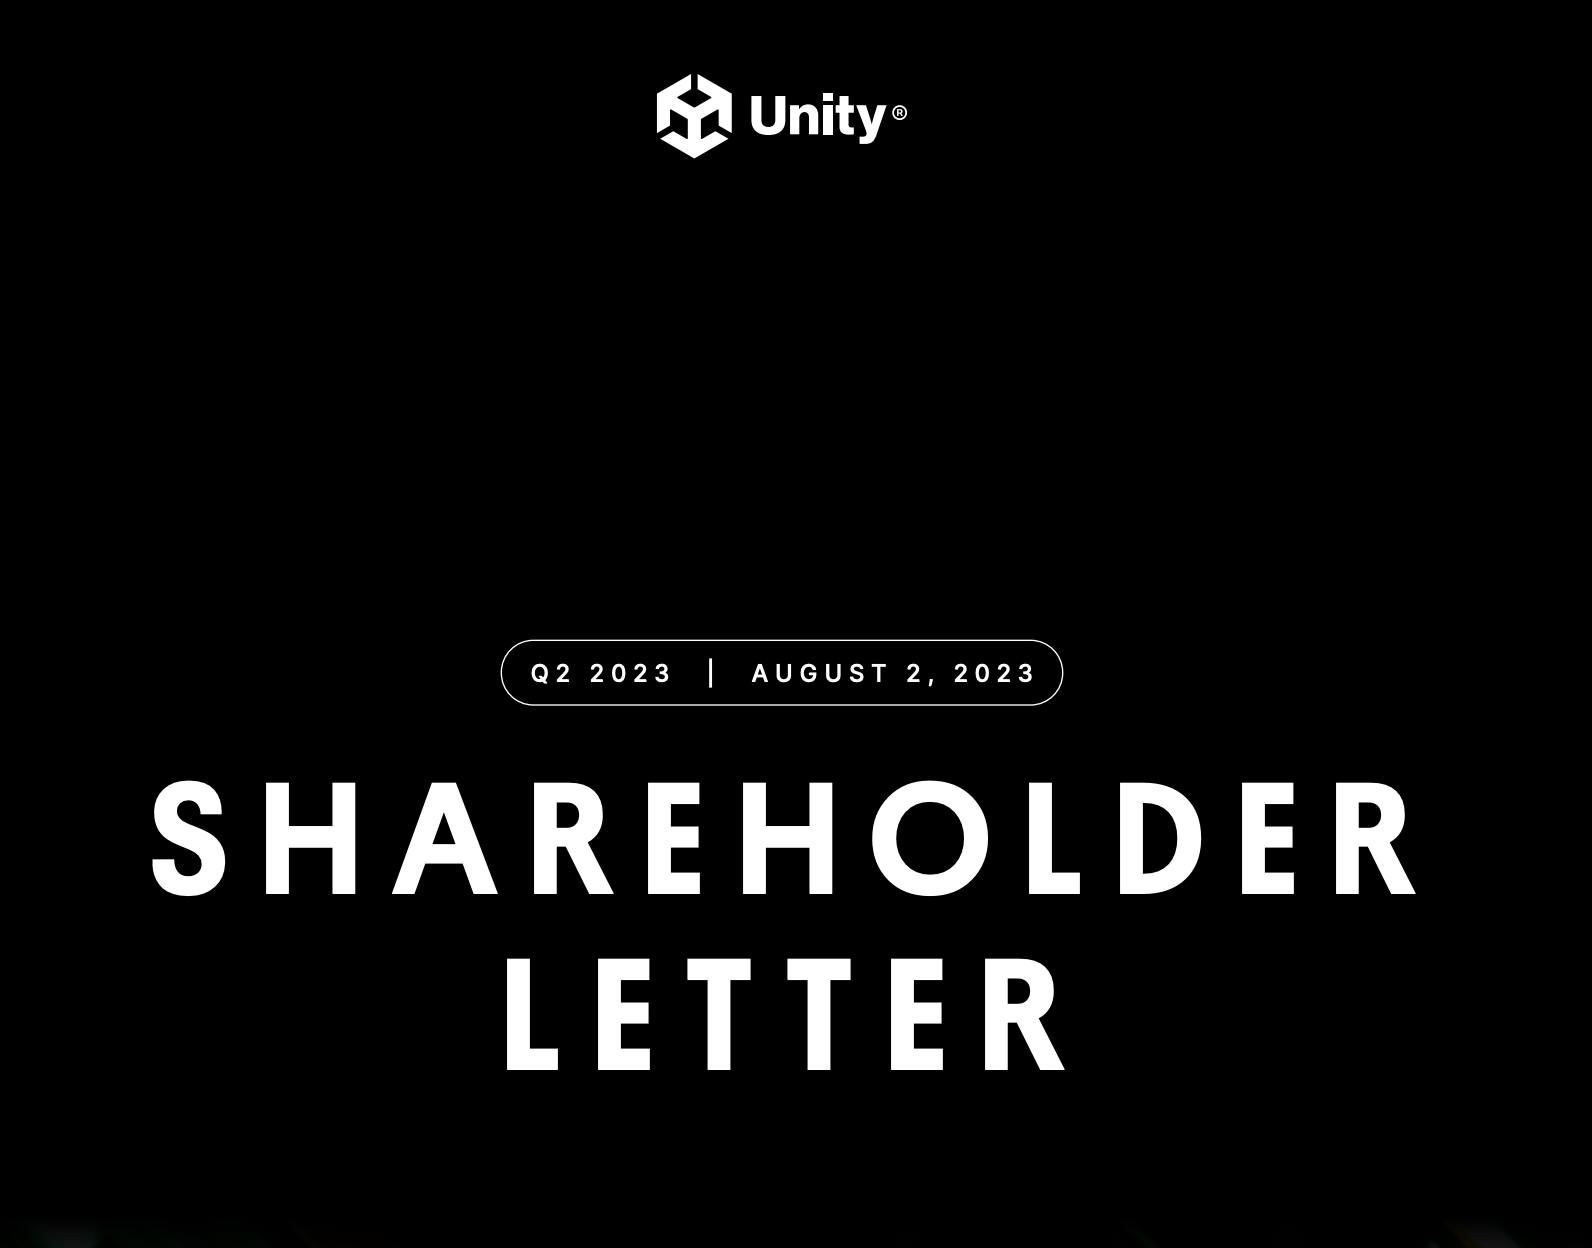 Unity Financial Results – Q2 2023